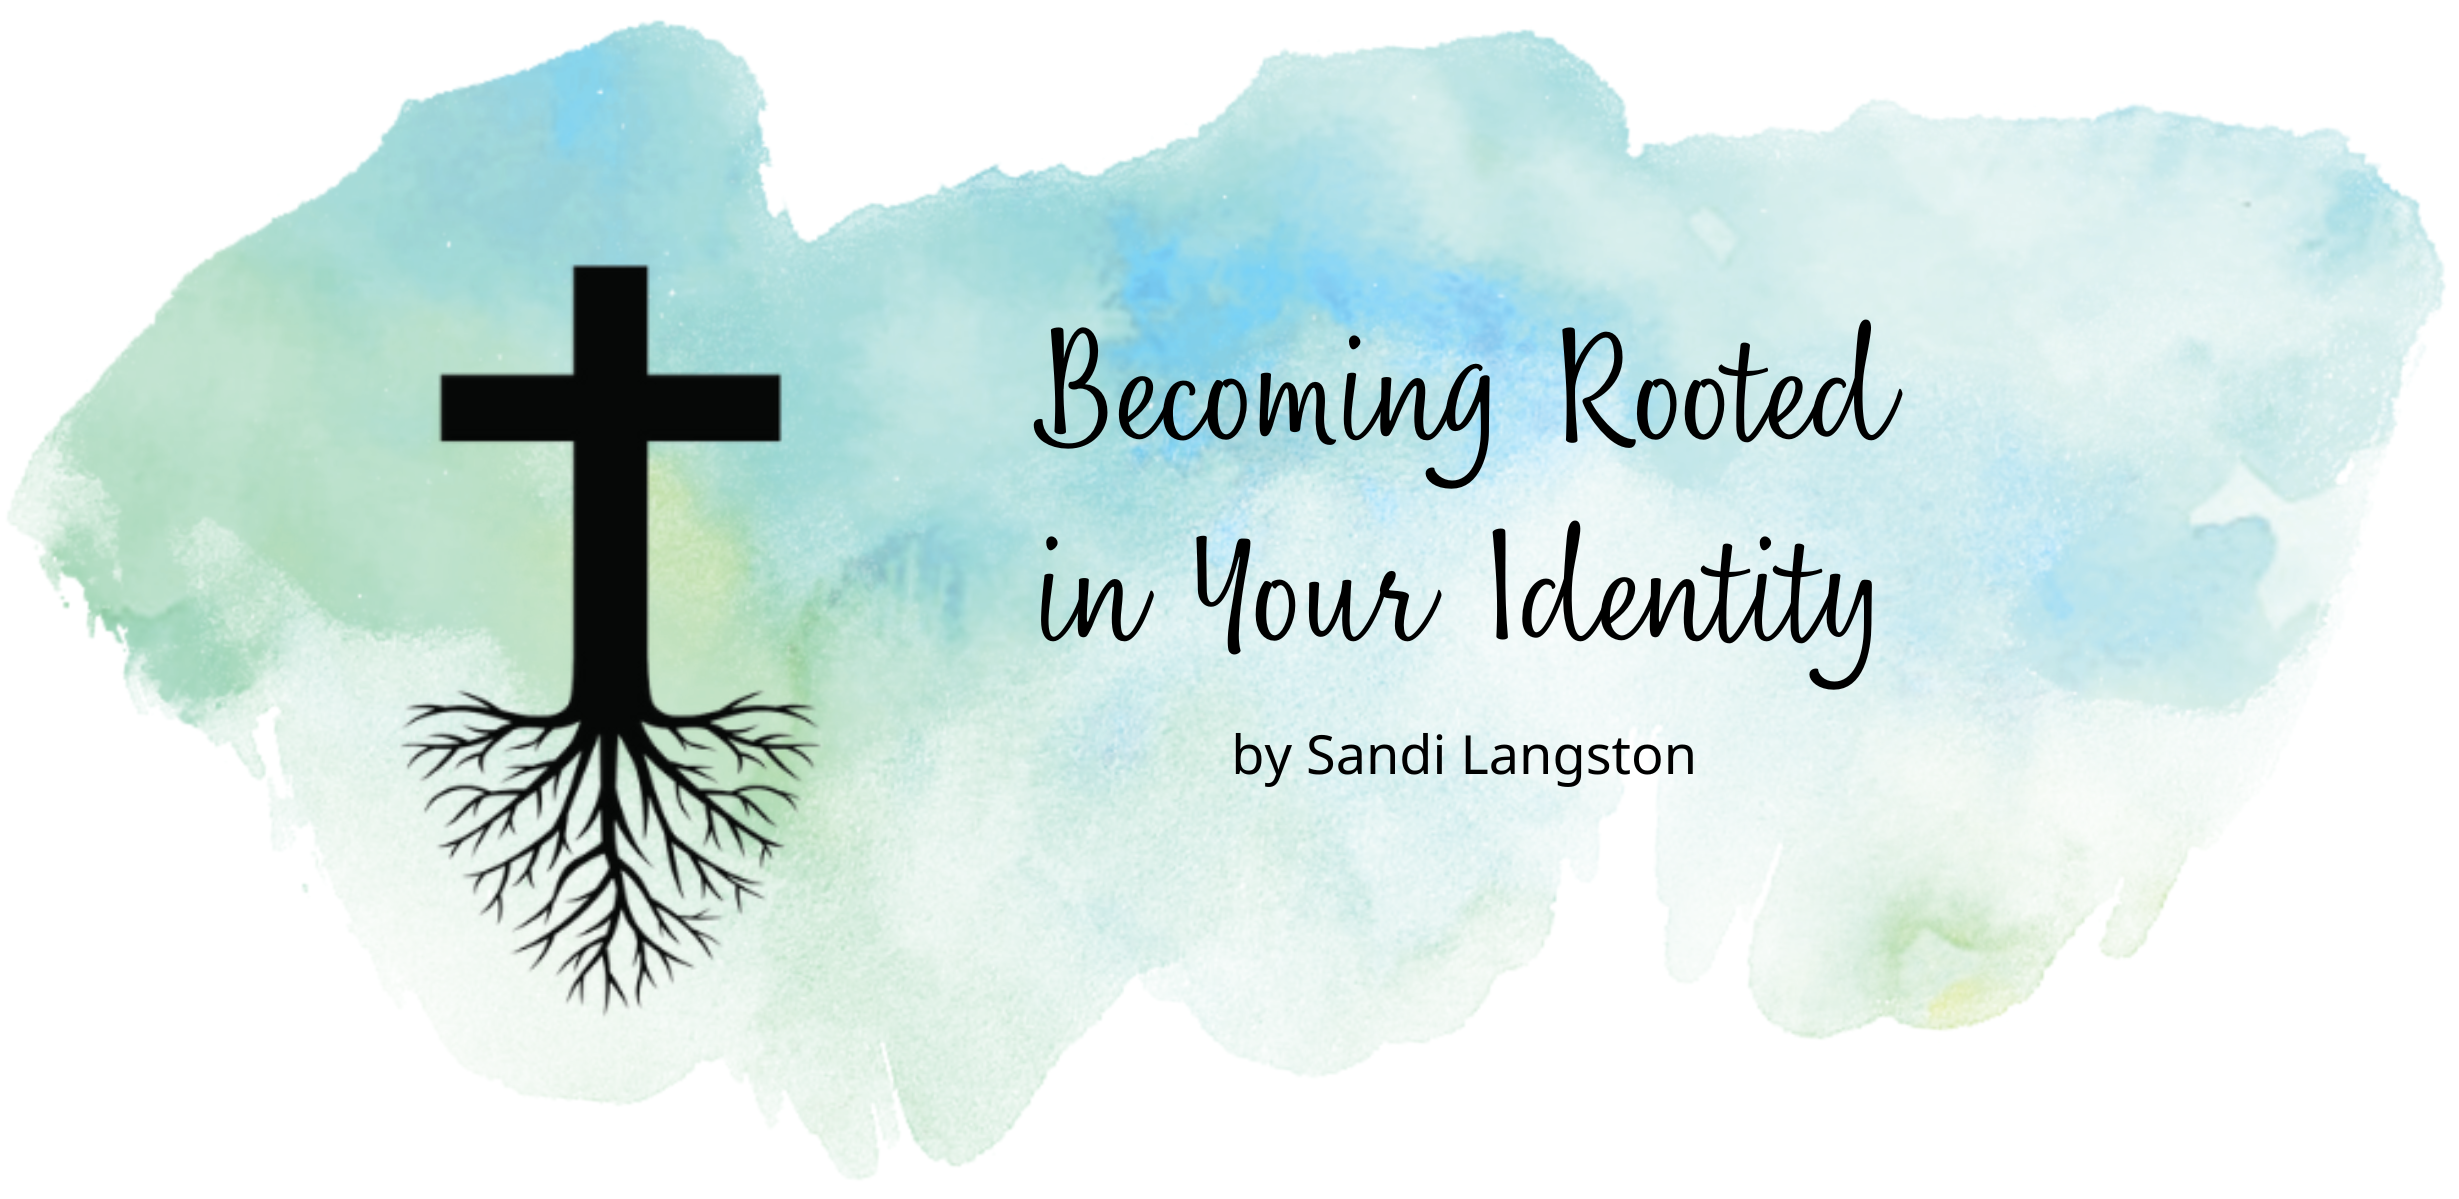 Becoming Rooted in your Identity